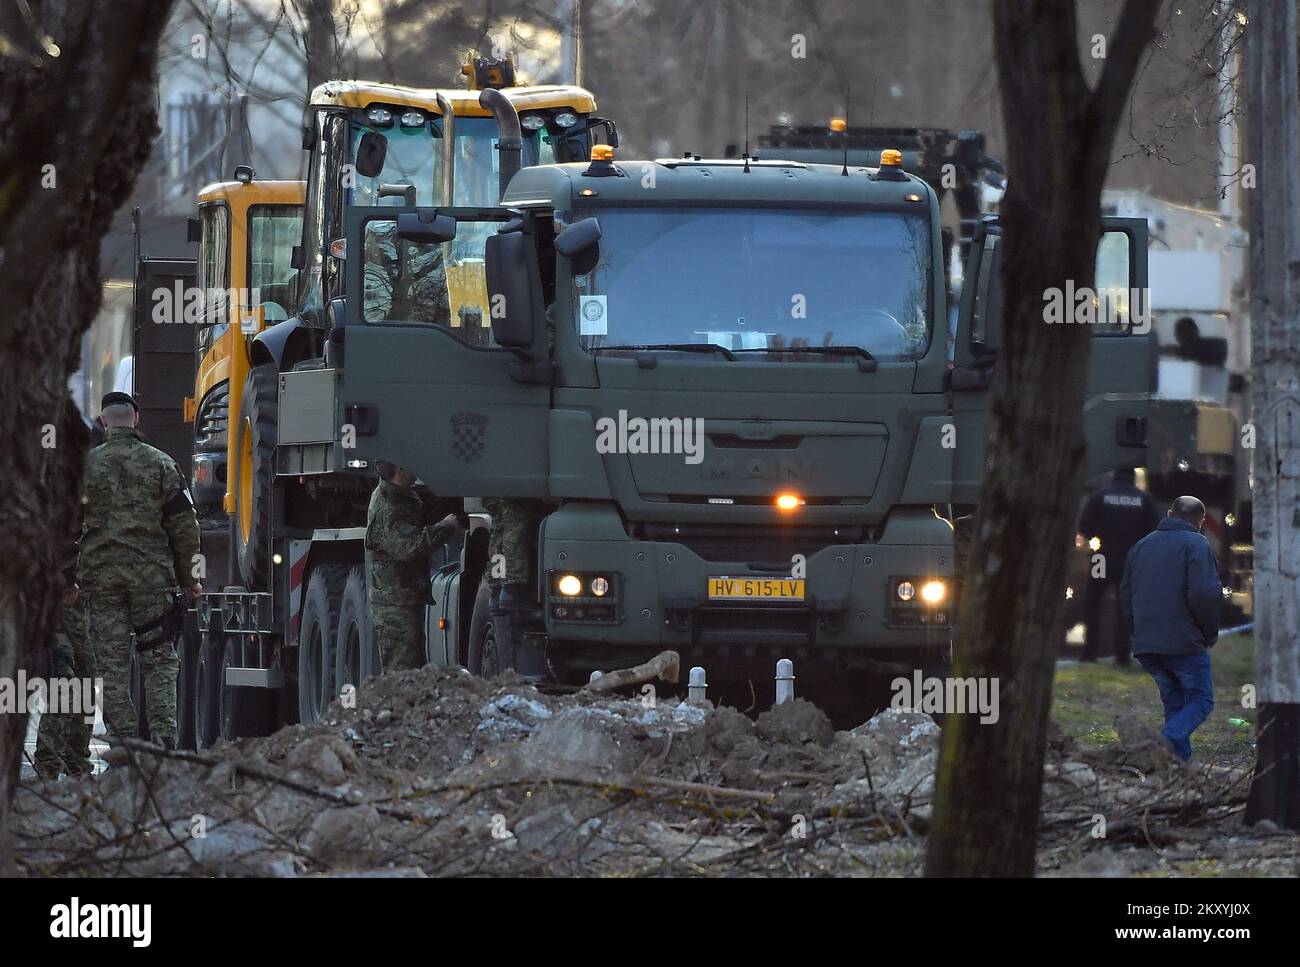 An excavator arrives at pilotless military aircraft crash site near Stjepan Radic student dorm in Zagreb, Croatia on March 11, 2022. According to the data collected so far, pilotless military aircraft, likely to be a Soviet-era Tu-141 Strizh severely malfunctioned entered Croatian airspace from the East to the West, from the airspace of Ukraine and Hungary, at a speed of 700 kph at an altitude of 1300 m. Photo: Marko Lukunic/PIXSELL Stock Photo